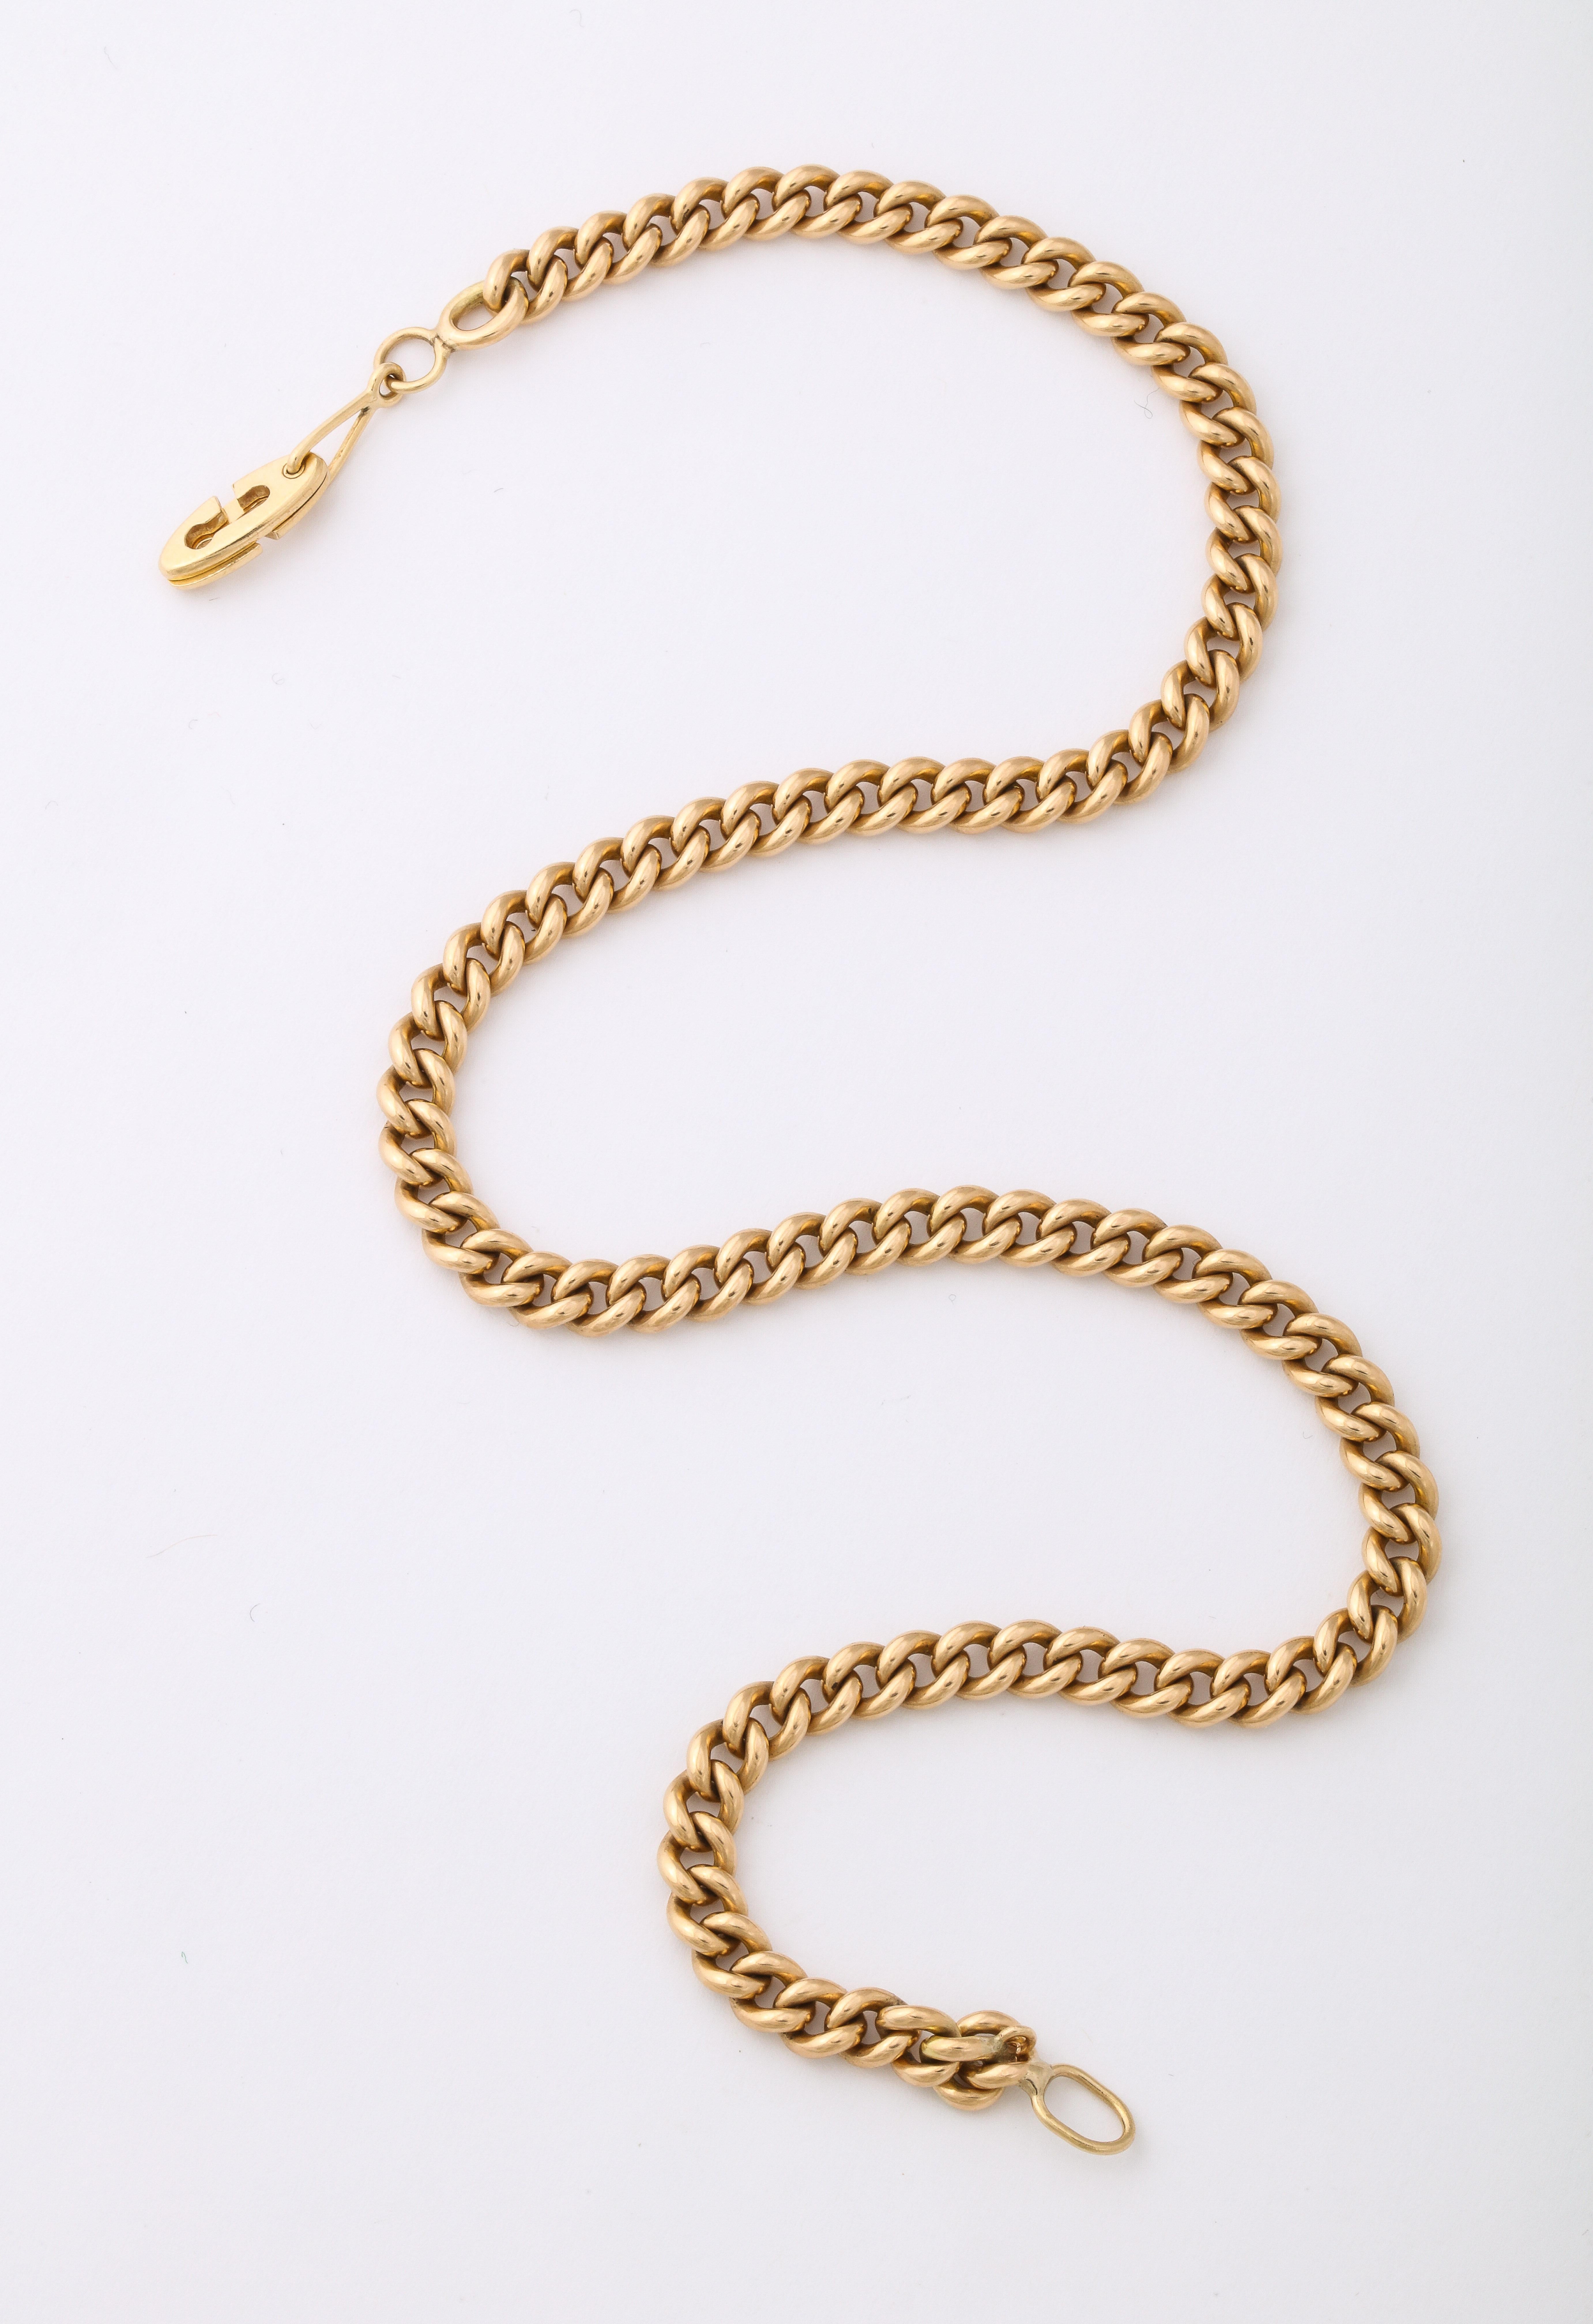 Signed Cartier 14K gold curb link chain necklace. 

14